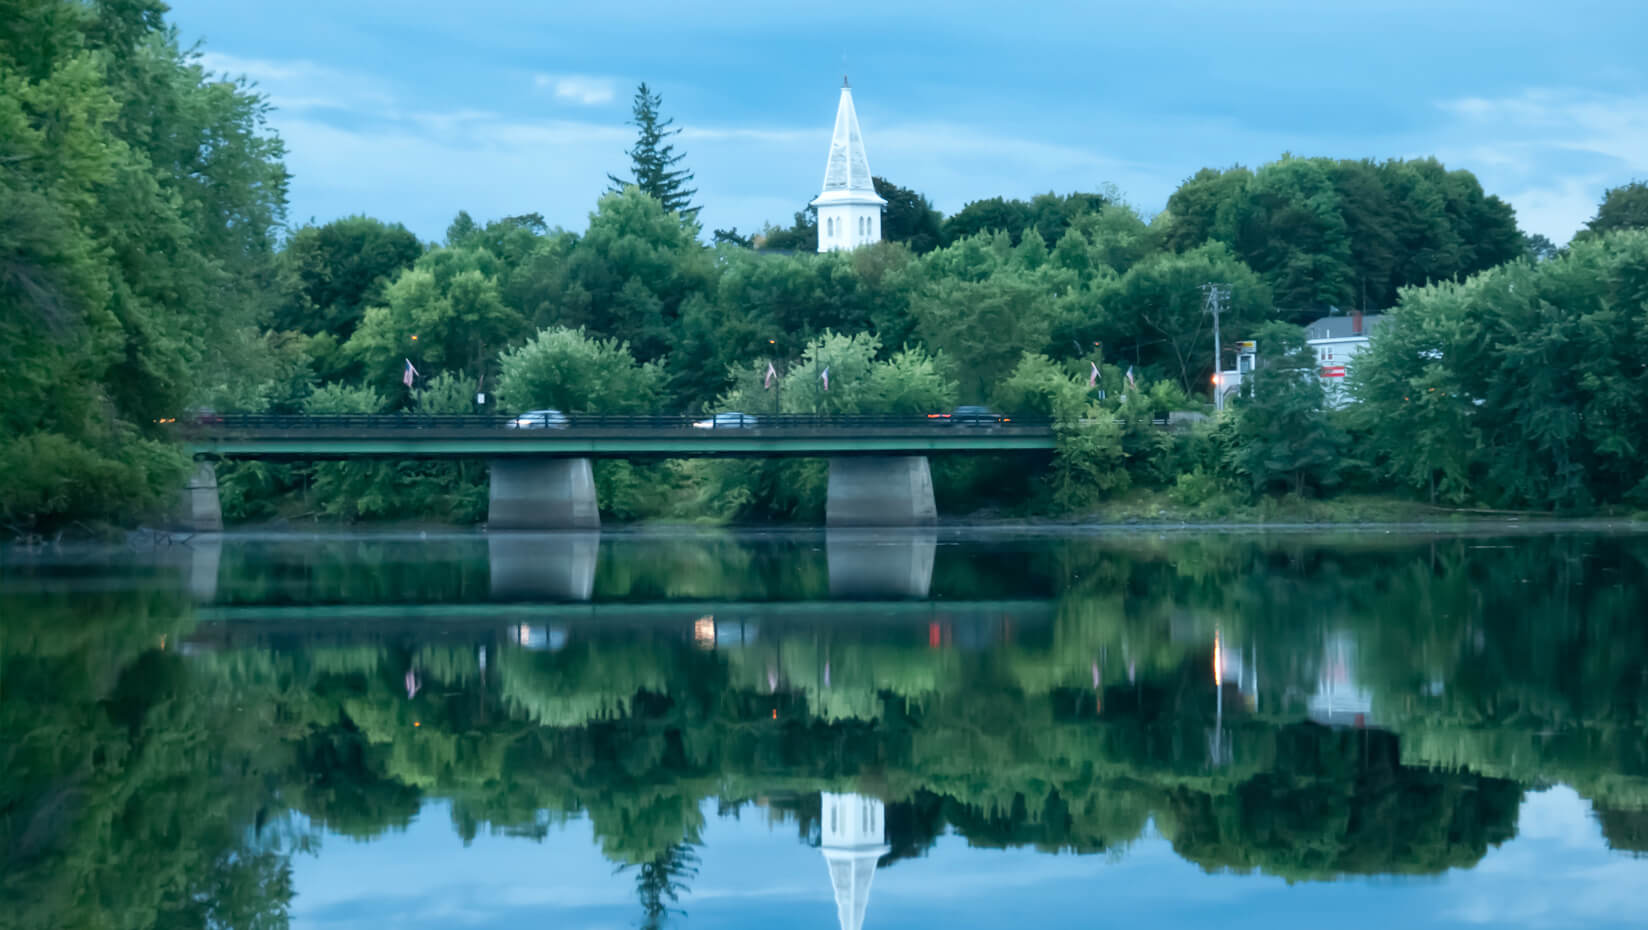 View of downtown Orono from the Stillwater River